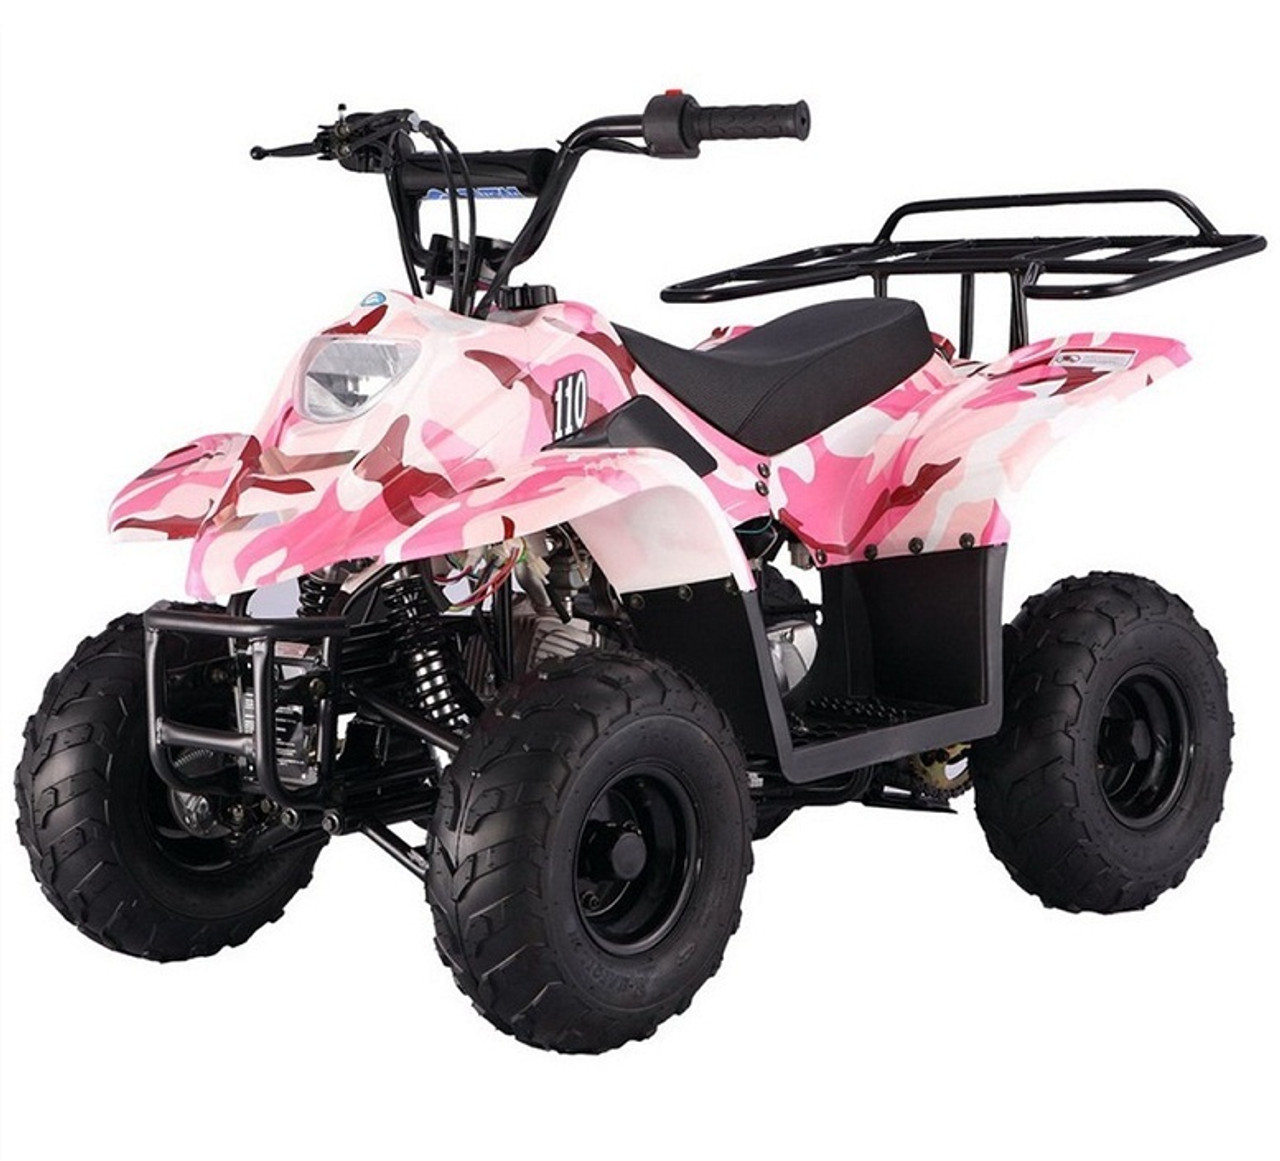 Taotao Boulder B1 110CC Small Kids ATV - Air Cooled, 4-Stroke, 1-Cylinder, Automatic - Fully Assembled and Tested